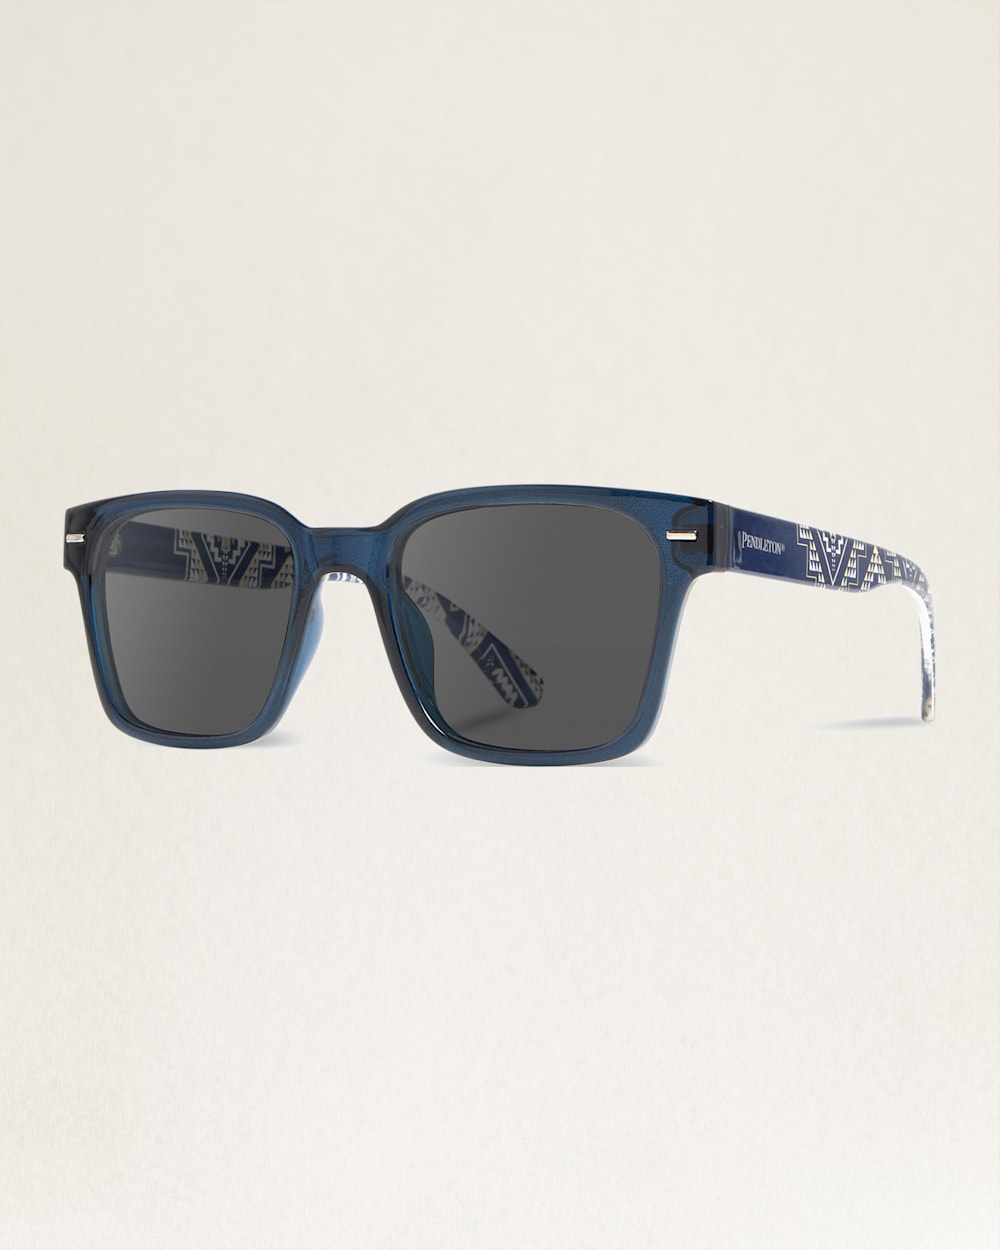 ALTERNATE VIEW OF SHWOOD X PENDLETON COBY POLARIZED SUNGLASSES IN NAVY CRYSTAL/OXBOW image number 2